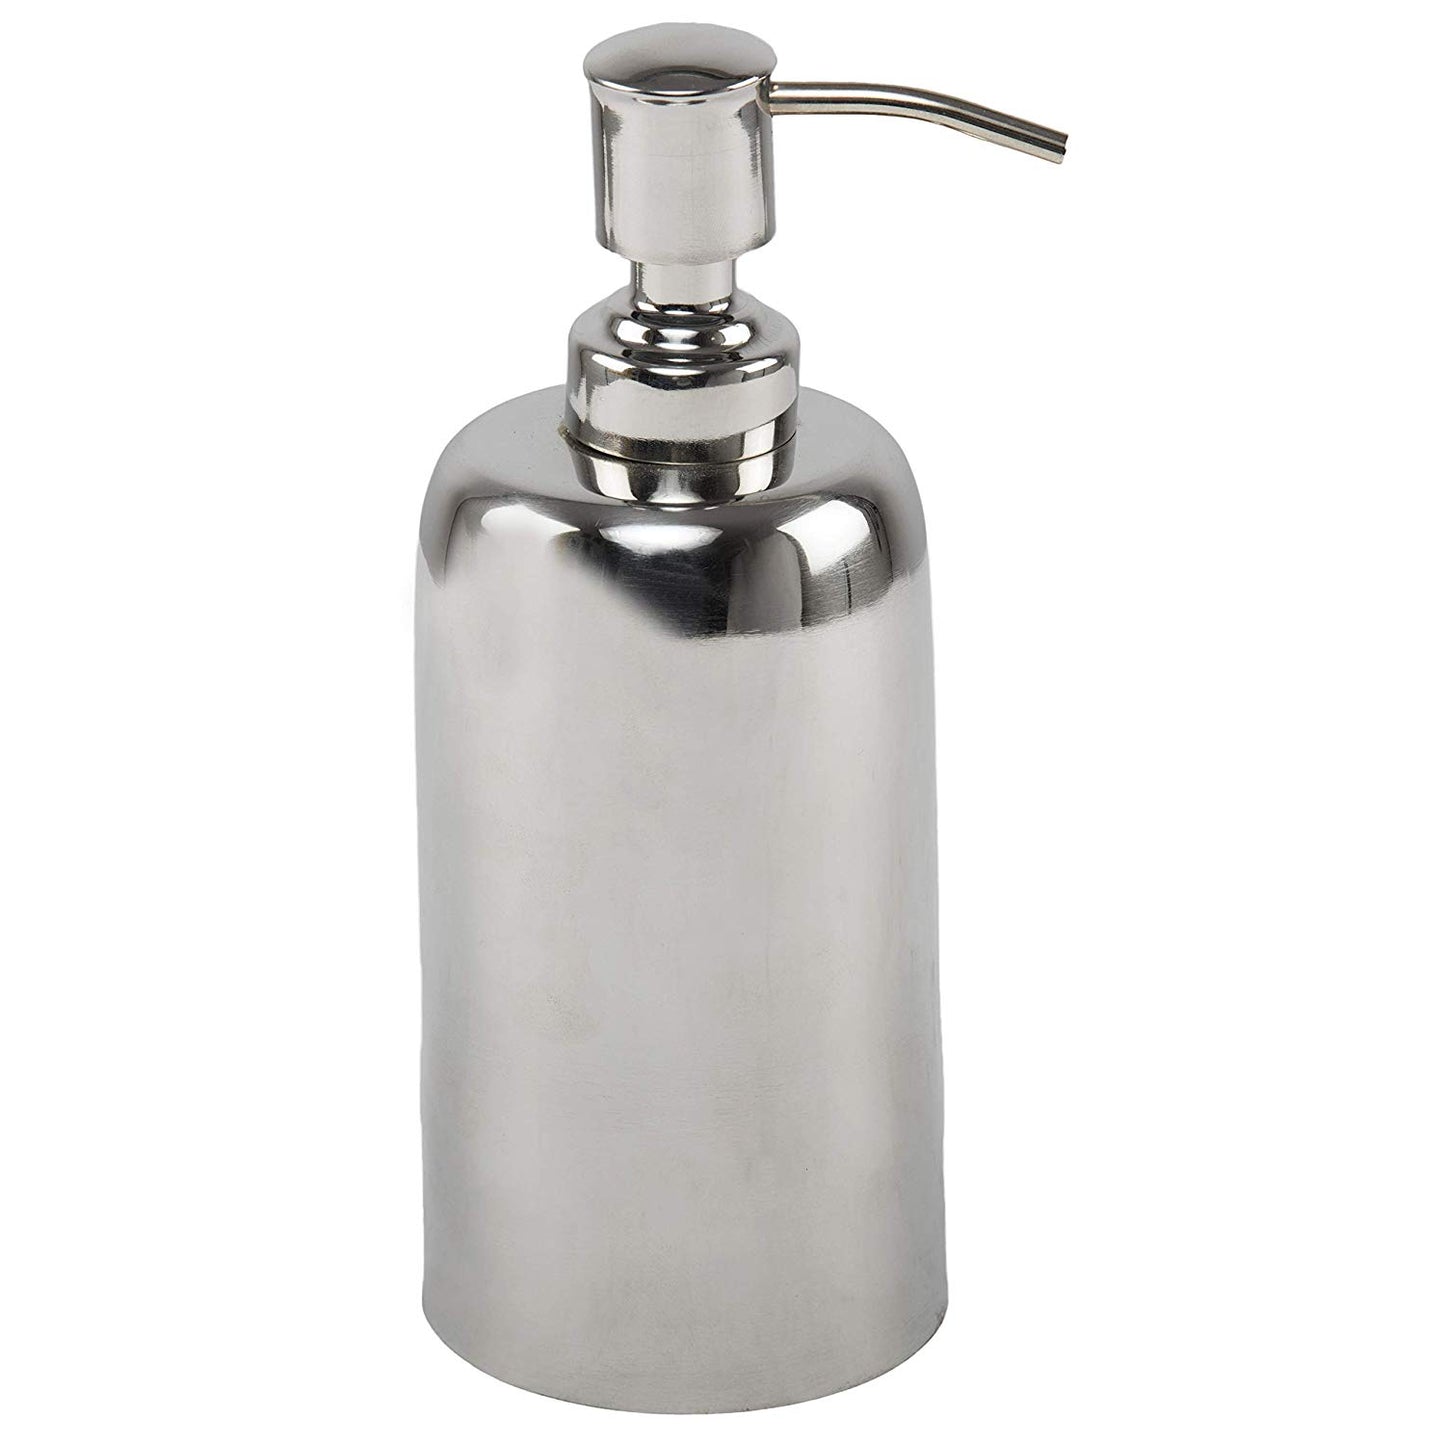 SWHF High Grade Stainless Steel Soap Dispenser- Curved - SWHF